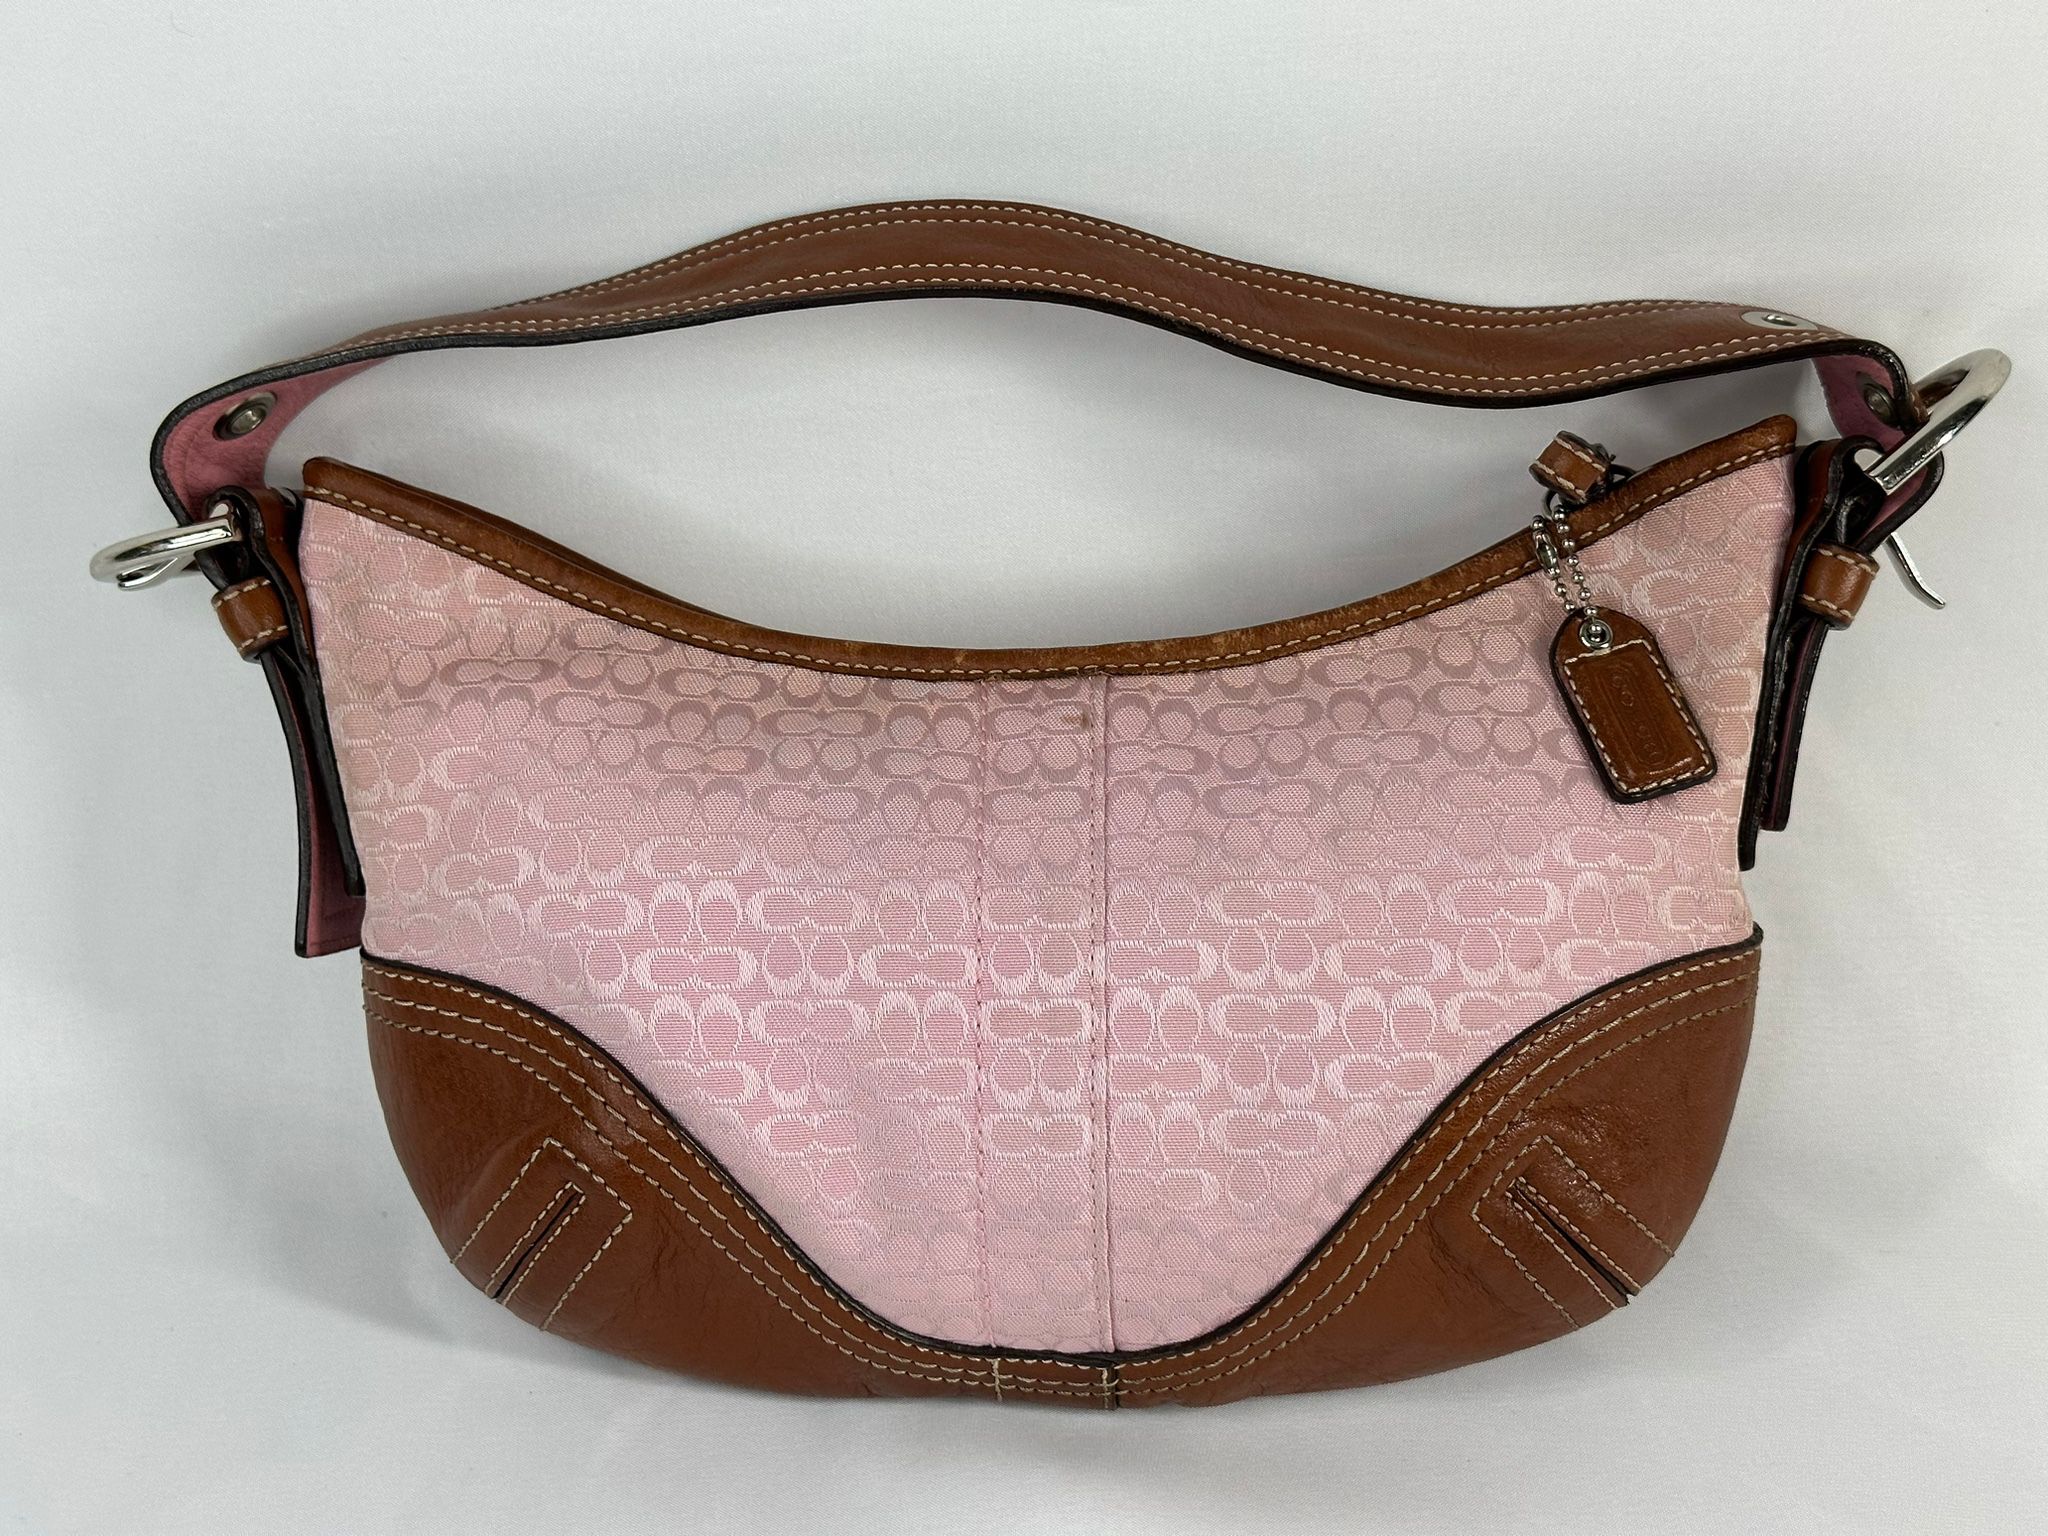 #434 Genuine Vintage Coach Purse/ Bag PINK w/ Brown Leather №K0618 F02154  for Sale in Littleton, CO - OfferUp